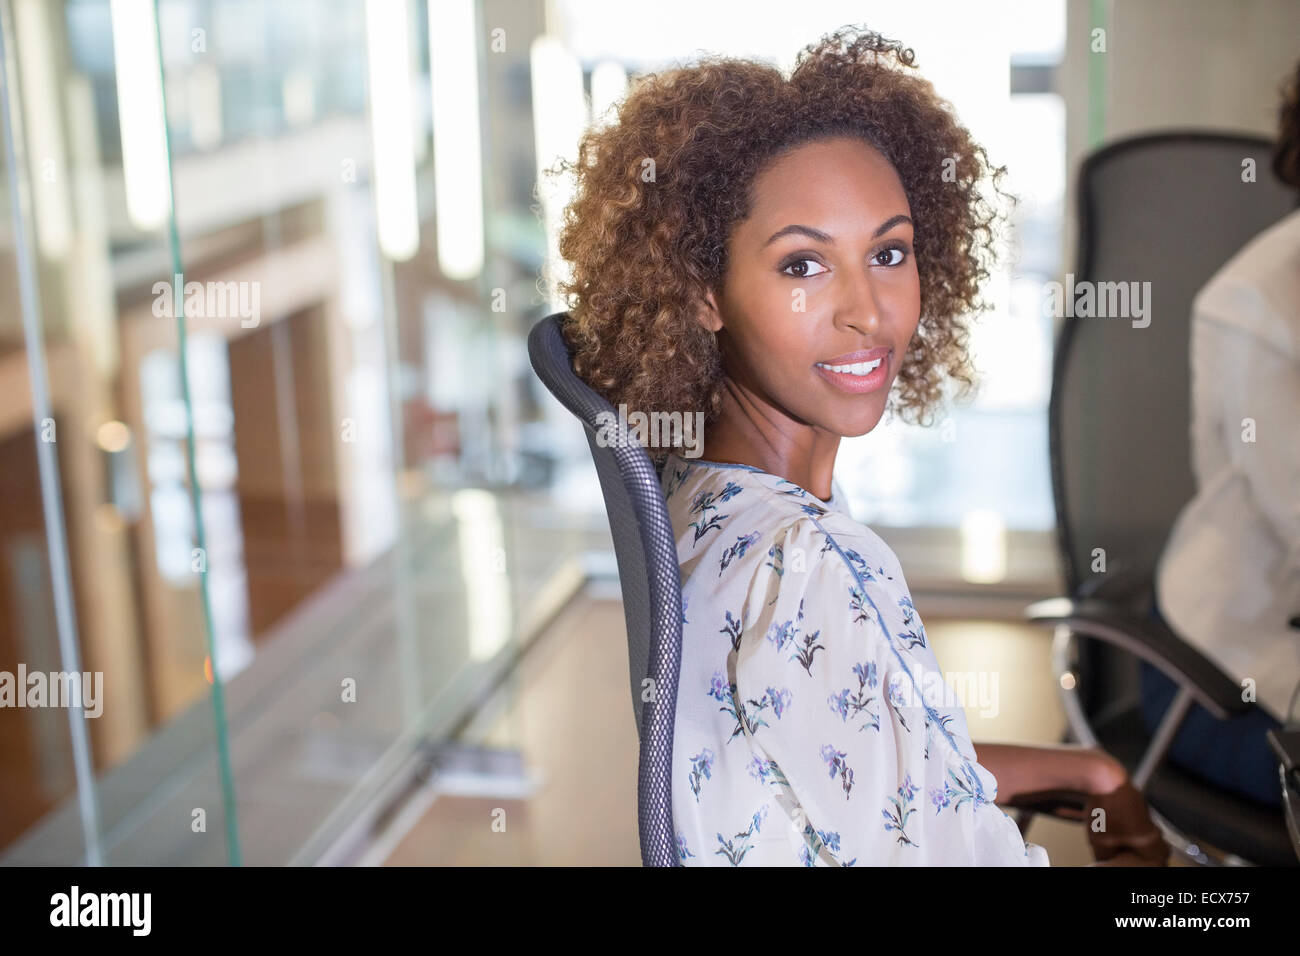 Portrait of young businesswoman sitting in chair et looking at camera Banque D'Images